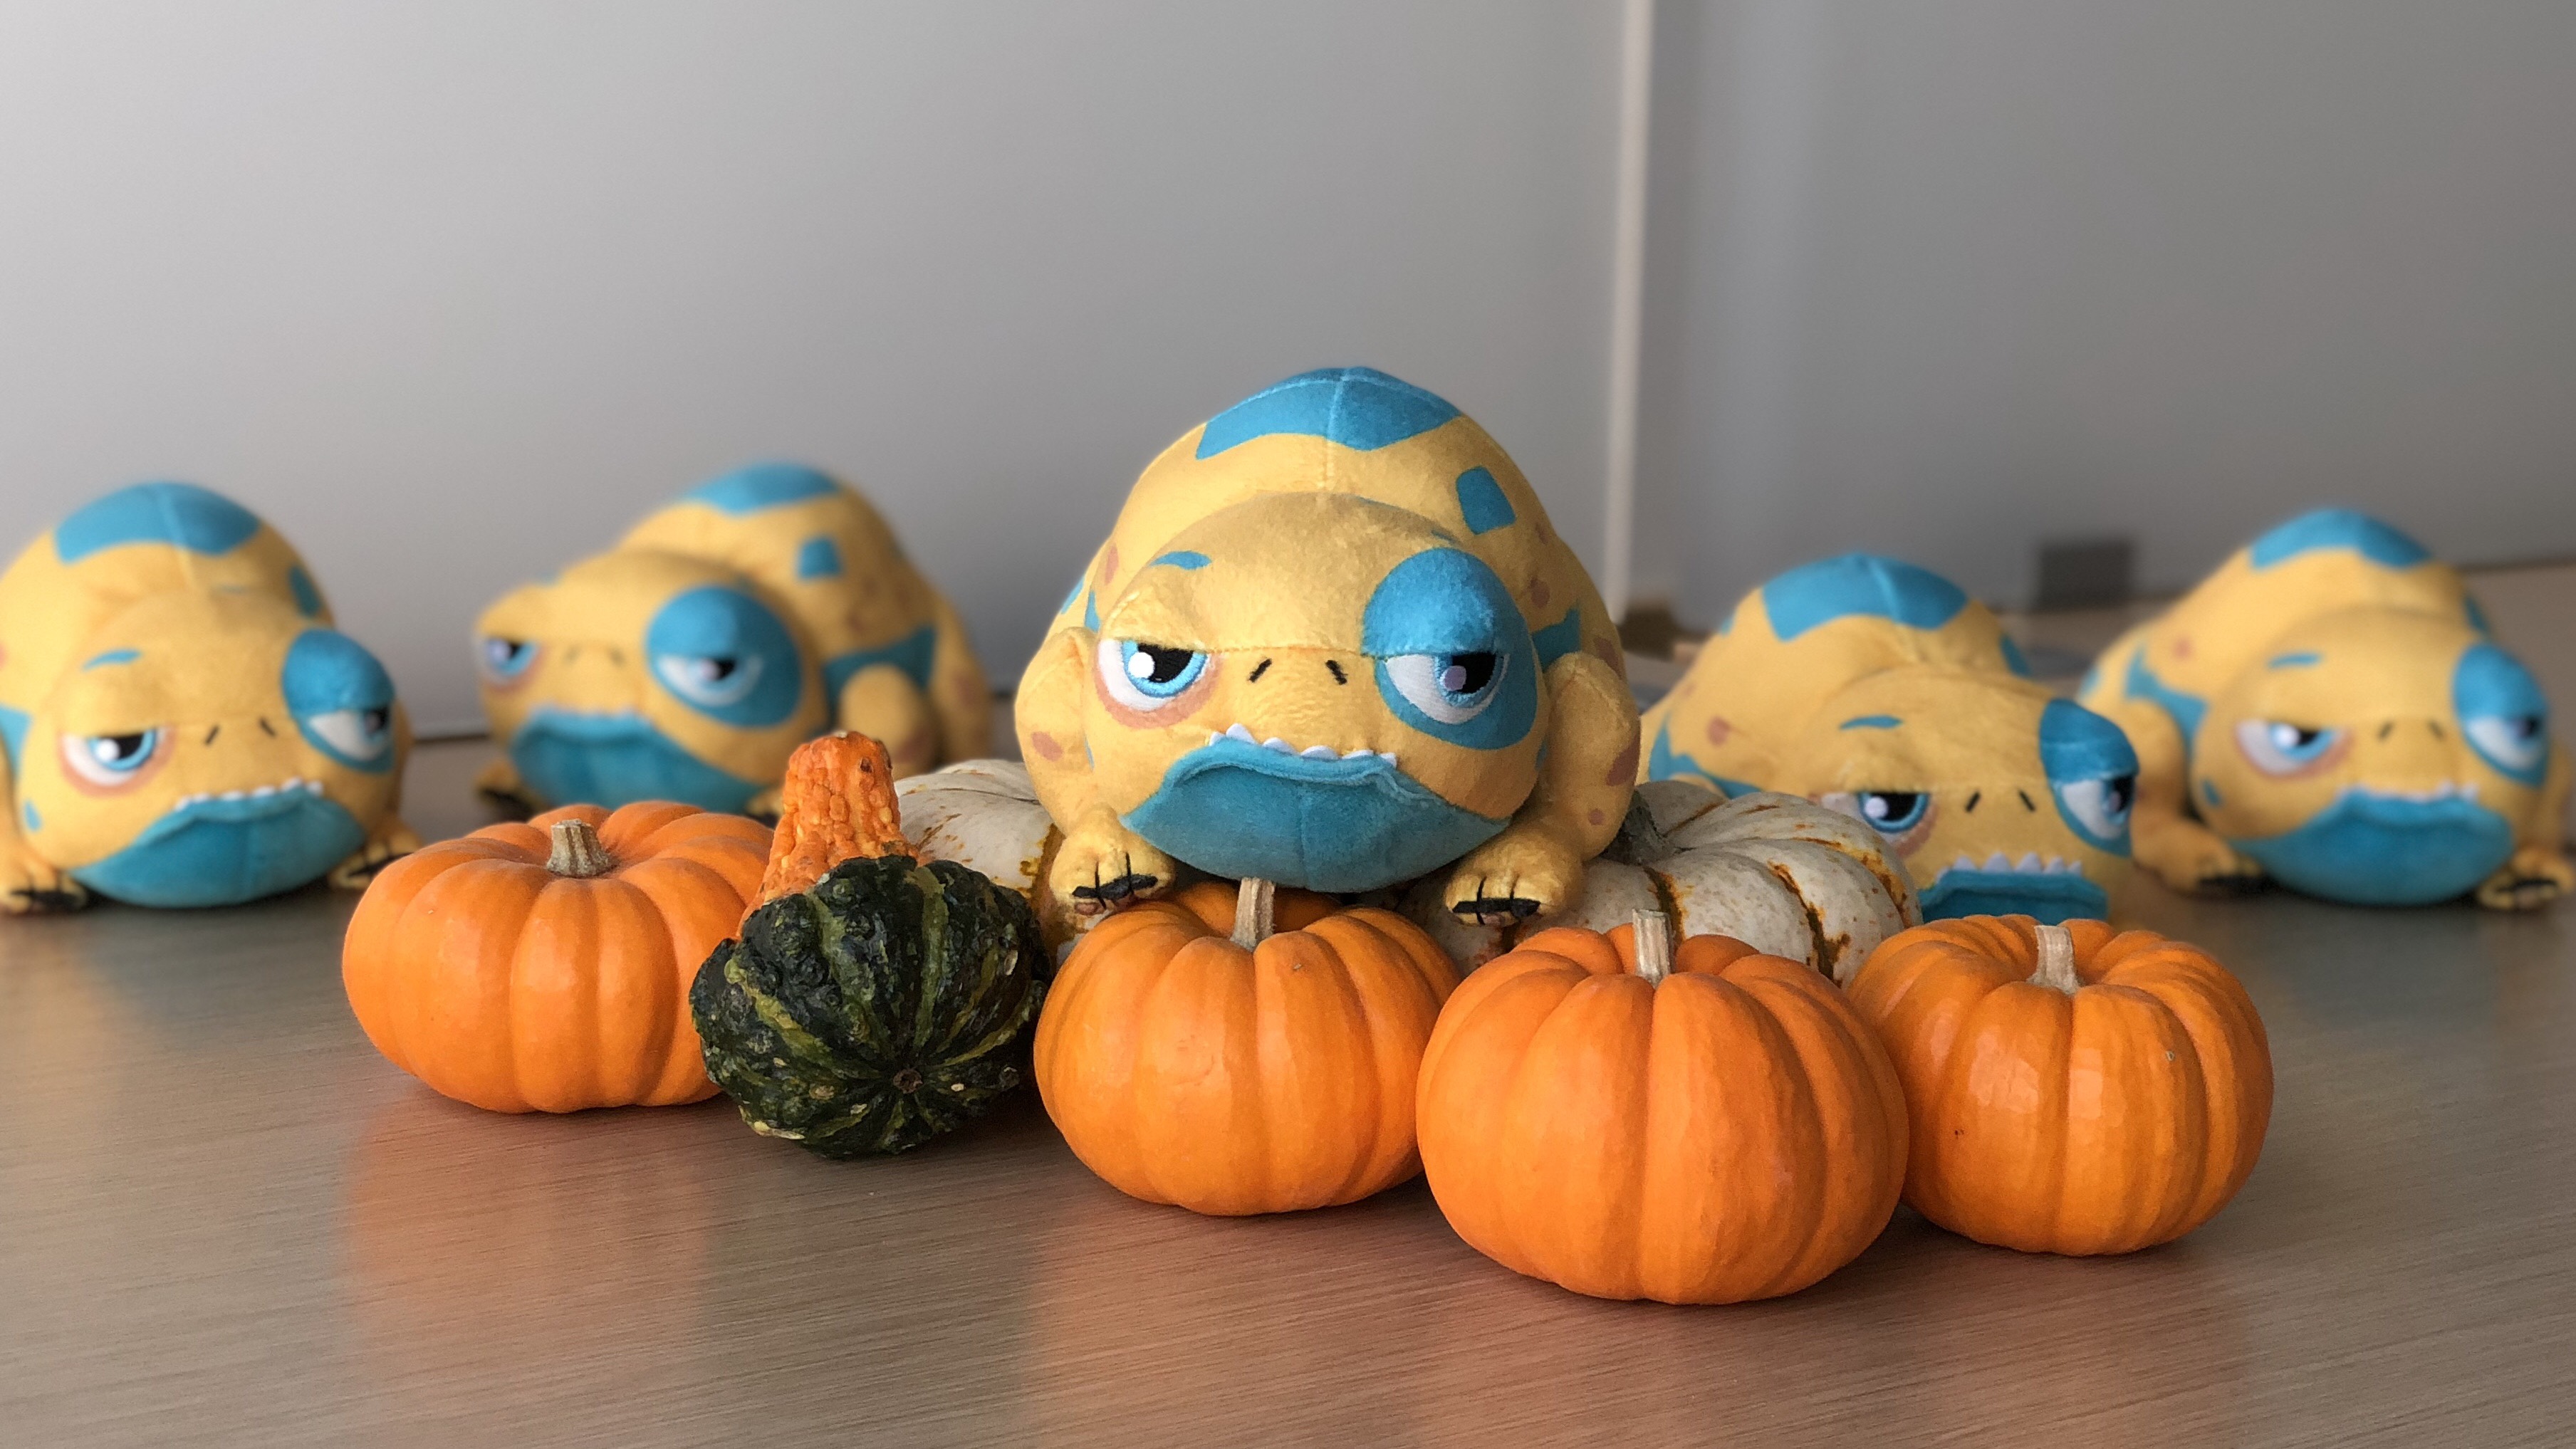 Carve Bait Into Your Pumpkin This Halloween